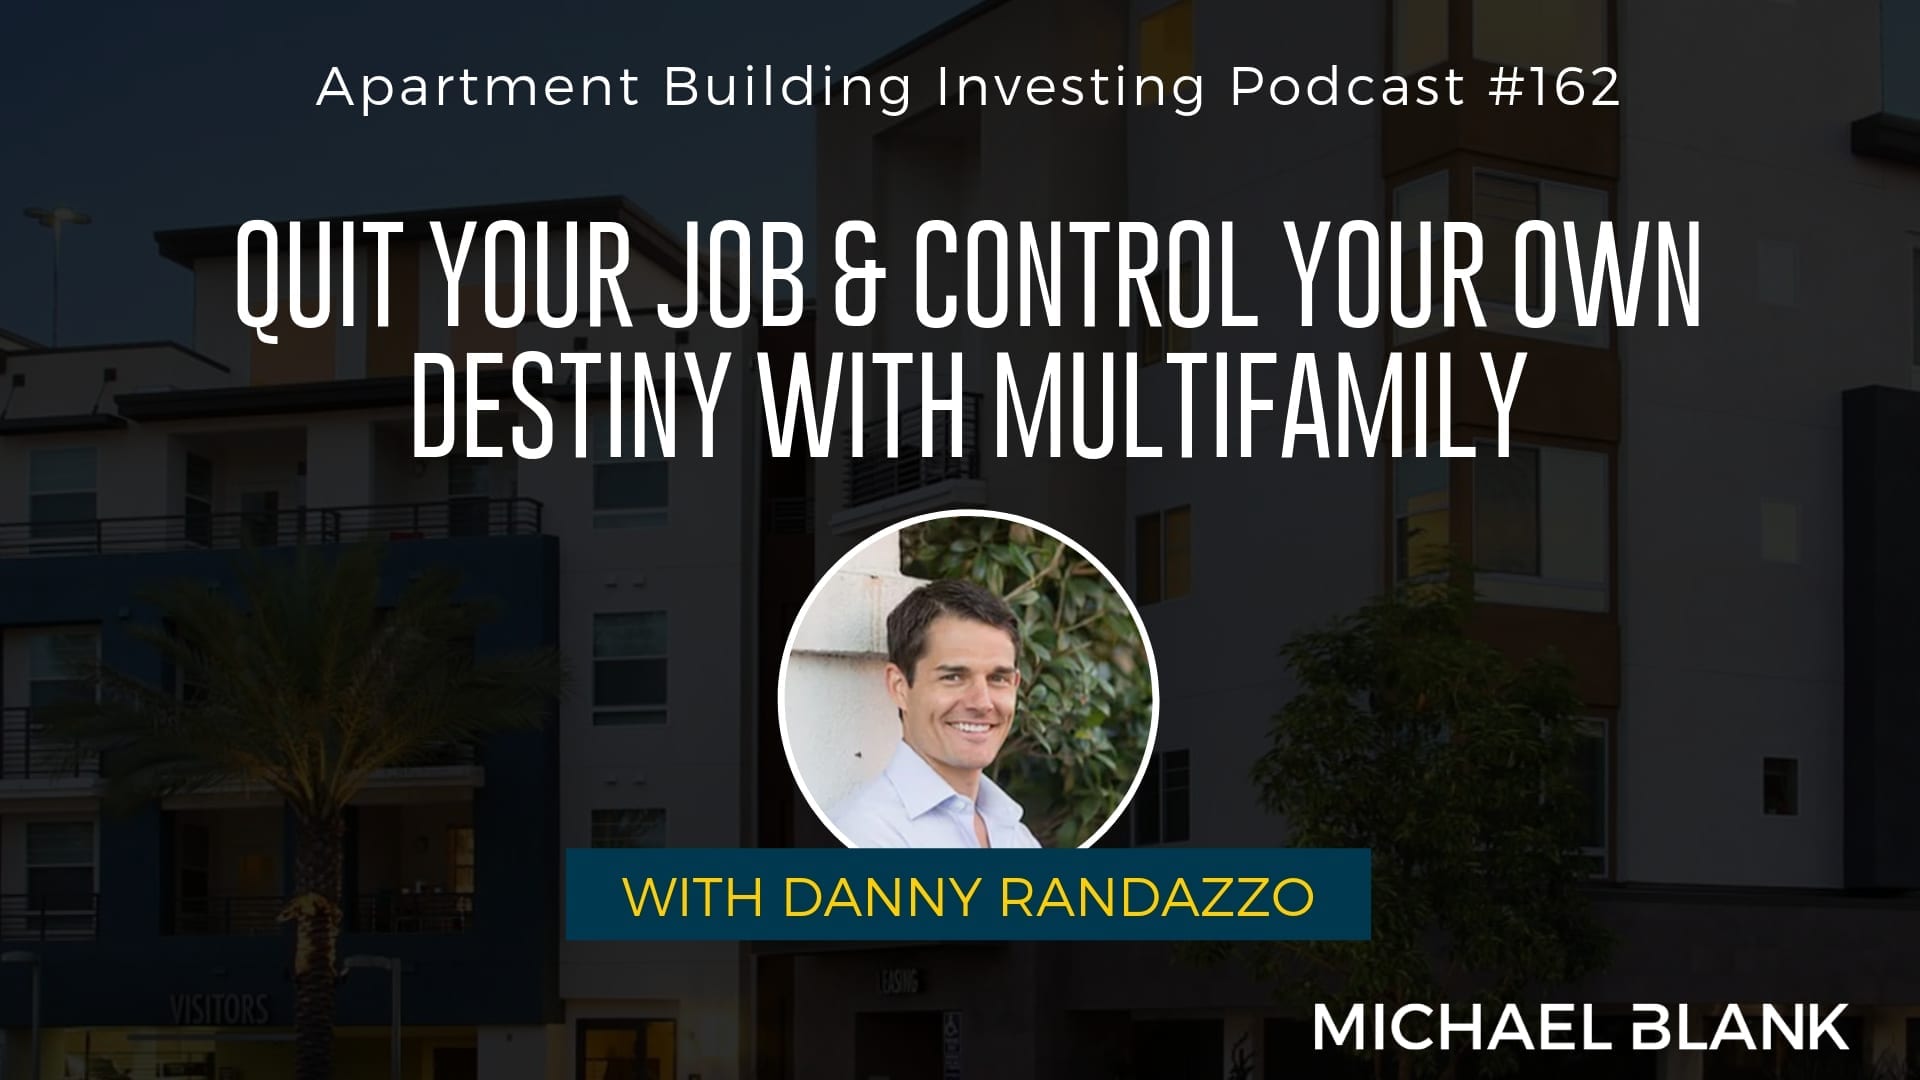 MB 162: Quit Your Job & Control Your Own Destiny with Multifamily – With Danny Randazzo